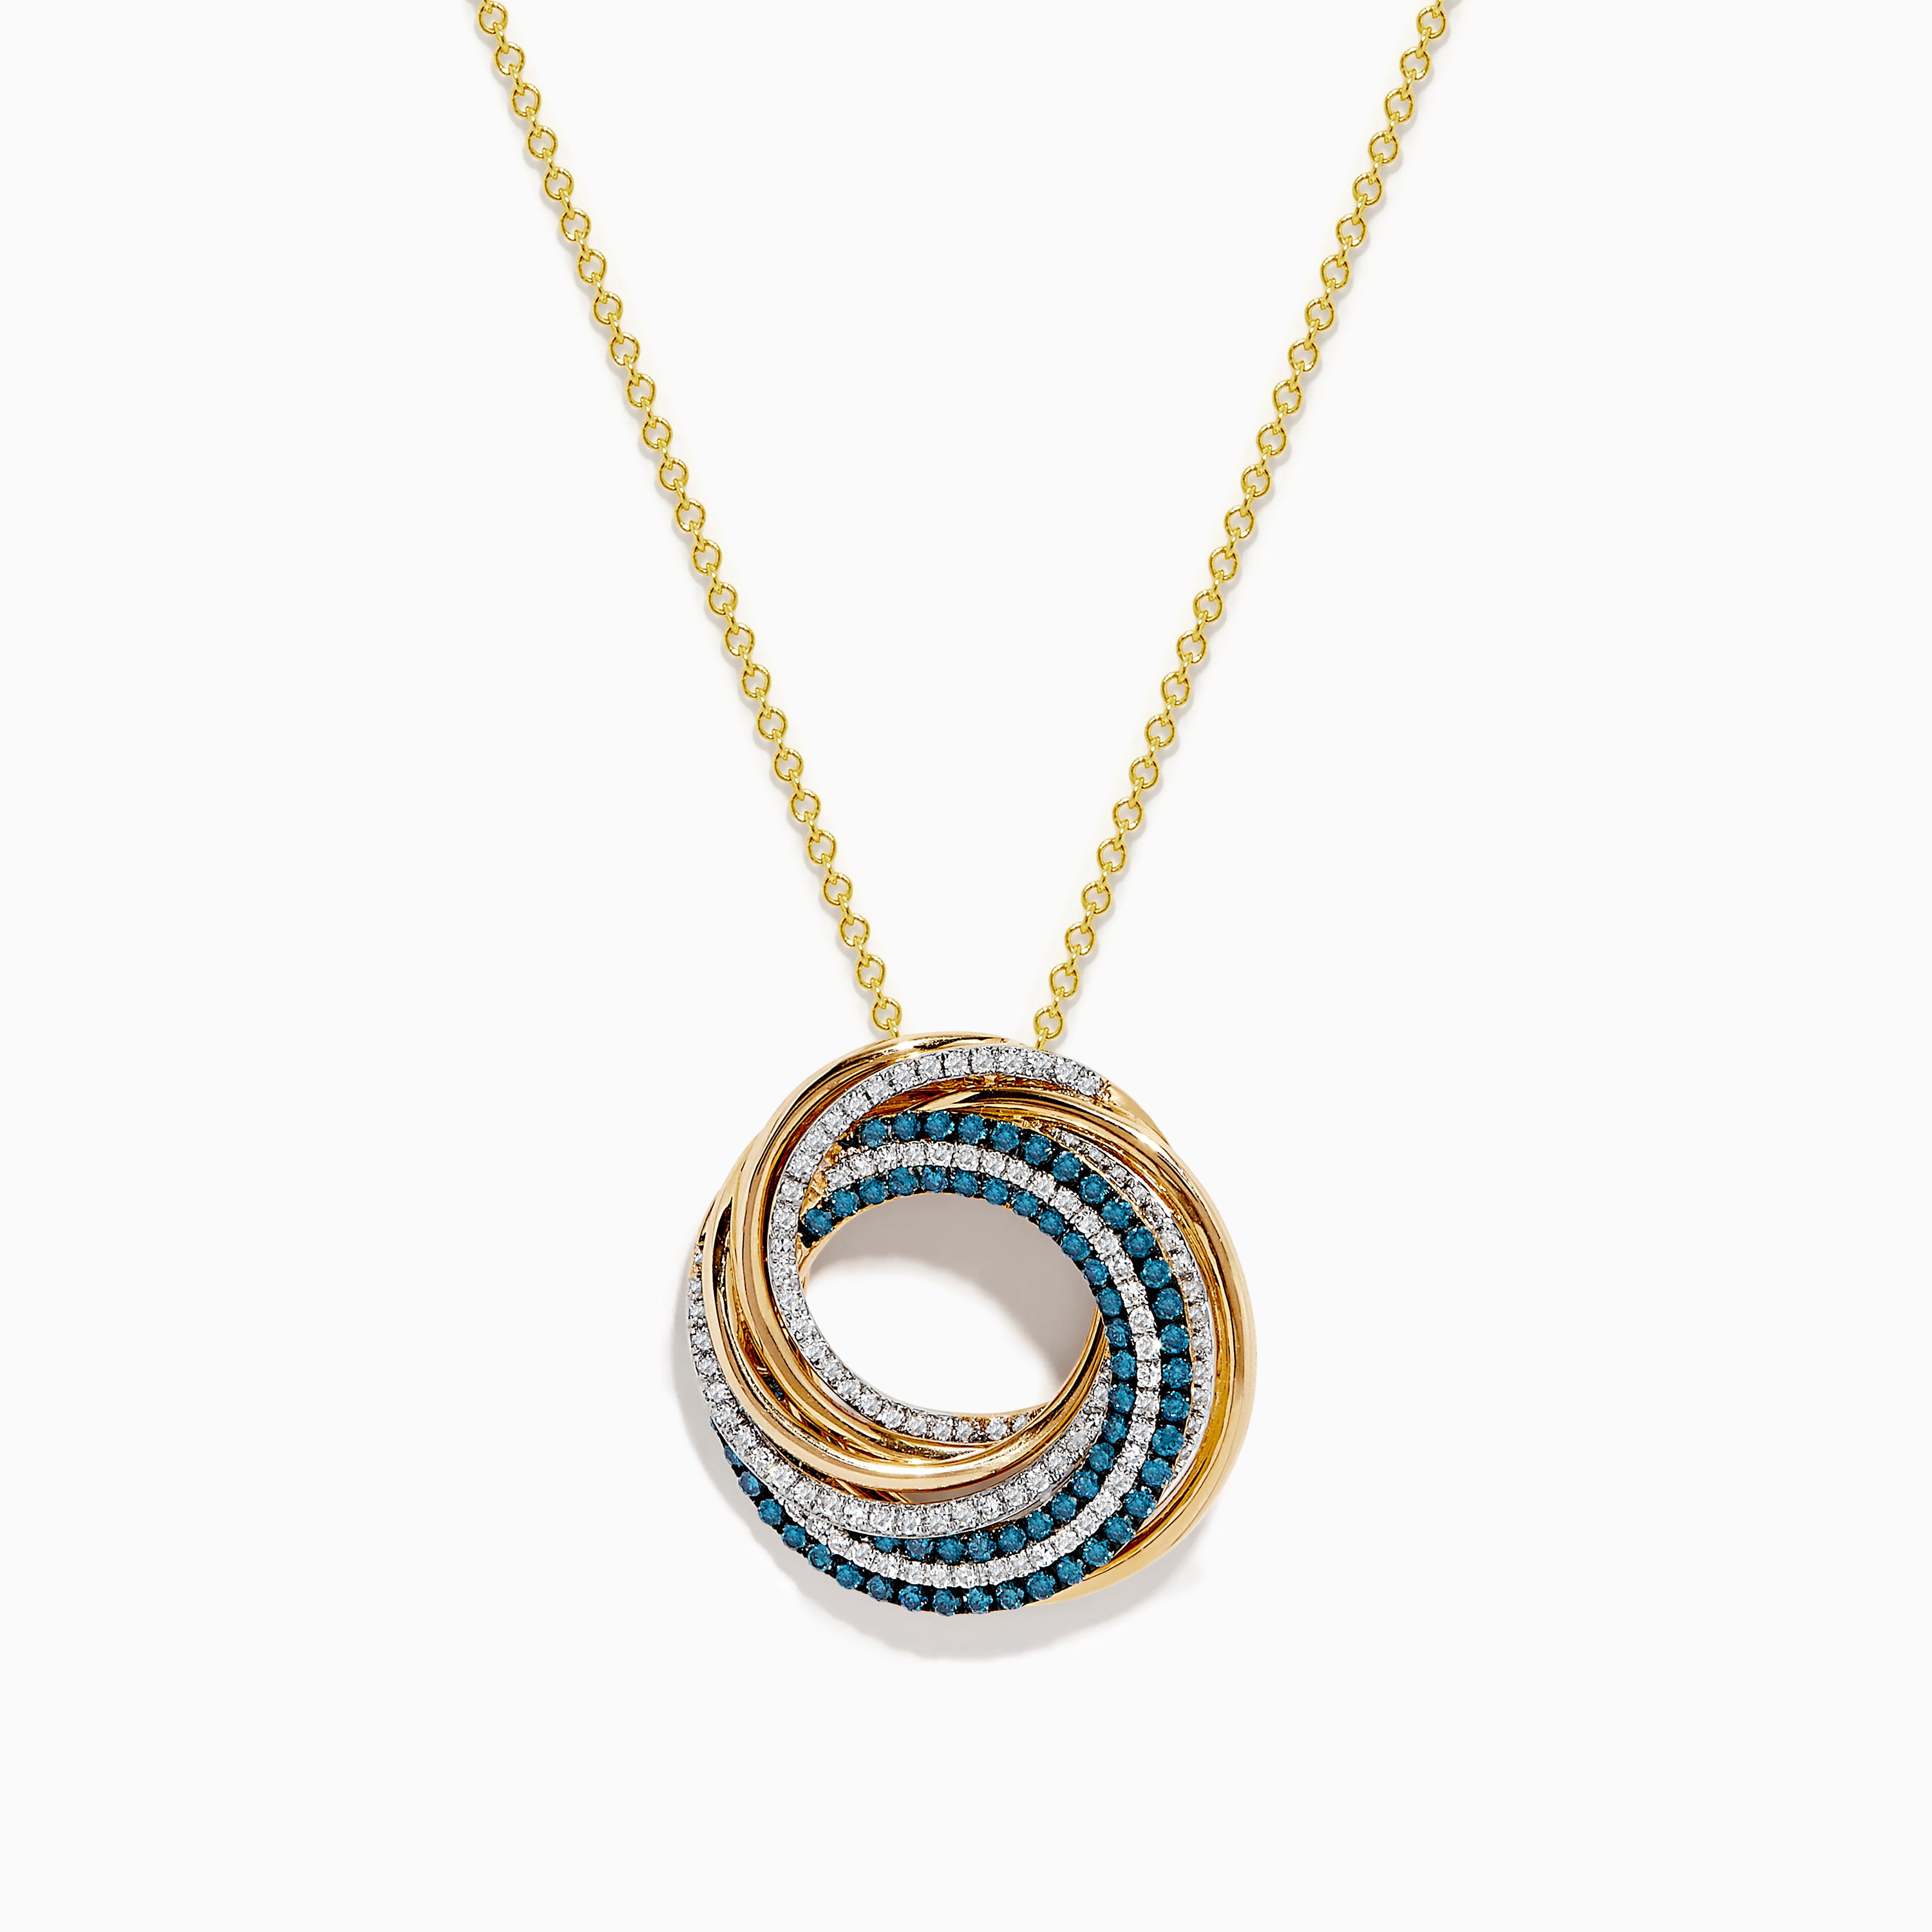 Buy Dugran By Dugristyle Blue & White Layered Necklace Online At Best Price  @ Tata CLiQ